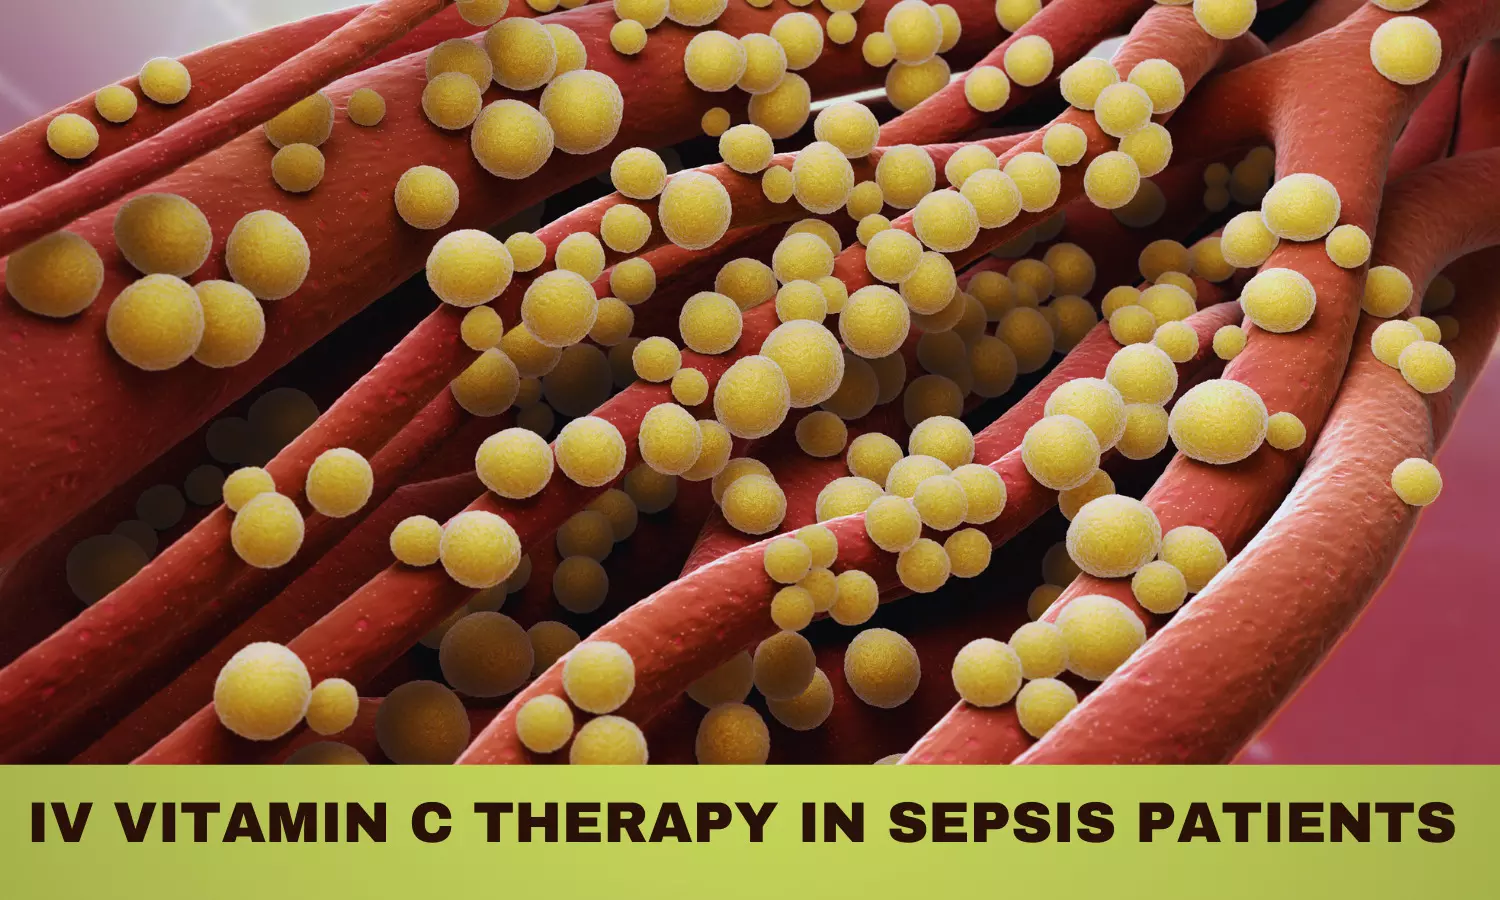 Does vitamin C therapy improve outcomes in sepsis patients? Study sheds light